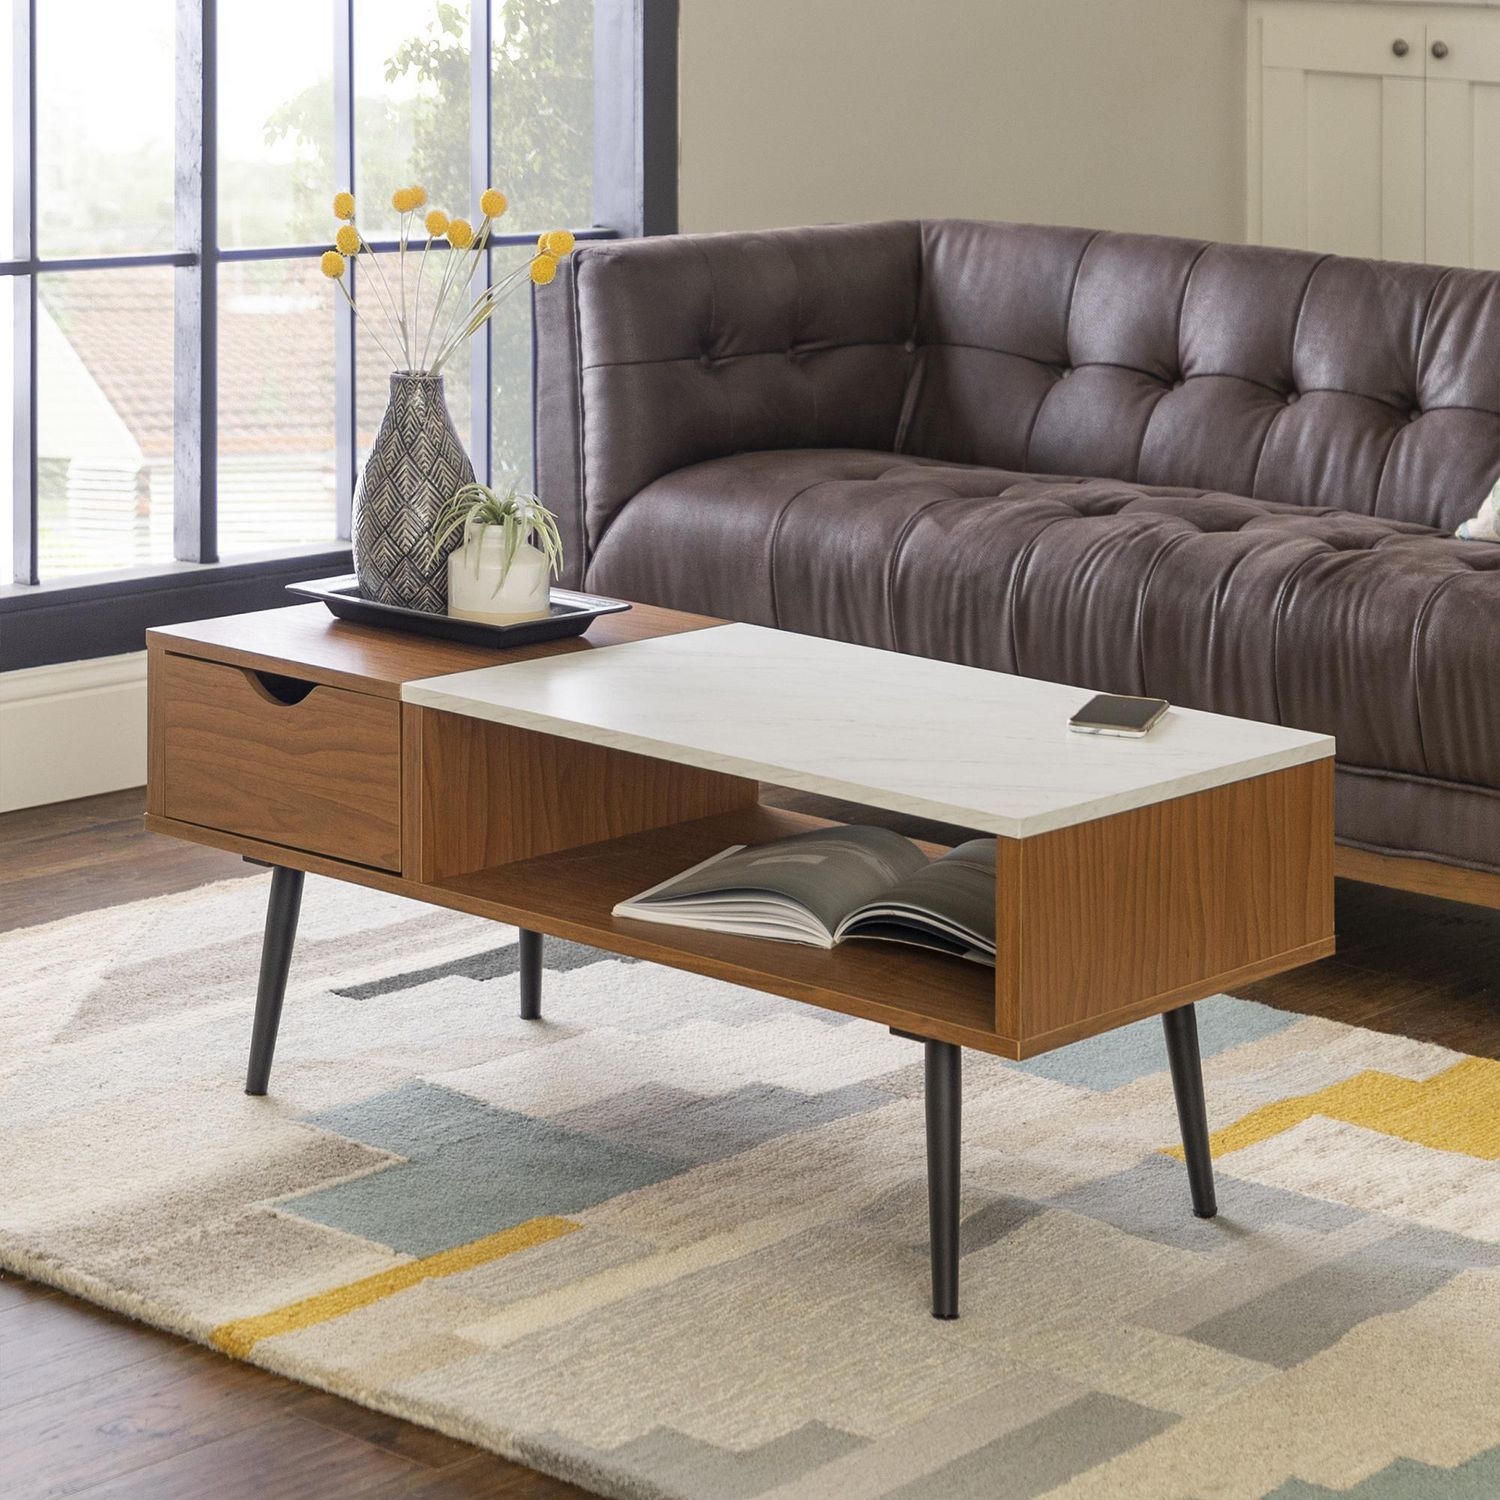 Manor Park Mid Century Modern Coffee Table With Storage – Multiple Intended For Mid Century Modern Coffee Tables (View 16 of 20)